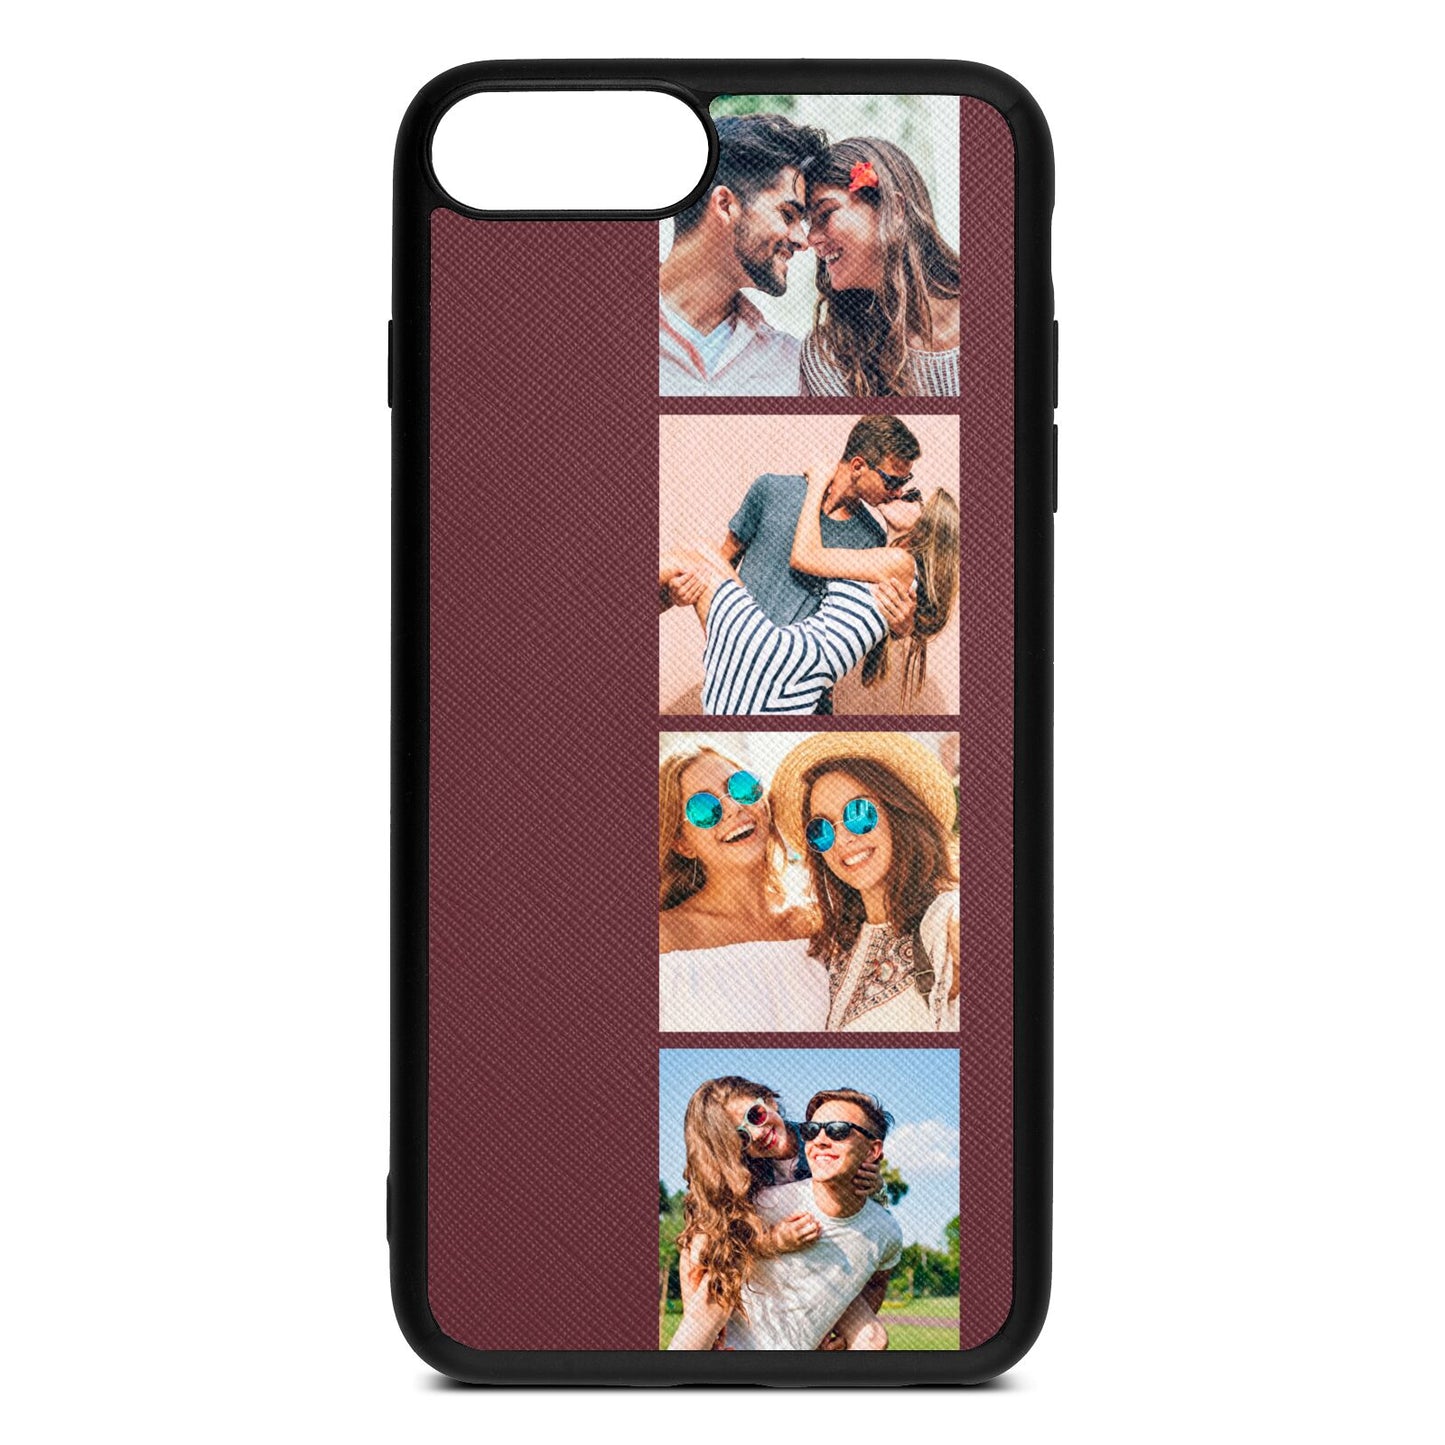 Photo Strip Montage Upload Rose Brown Saffiano Leather iPhone 8 Plus Case